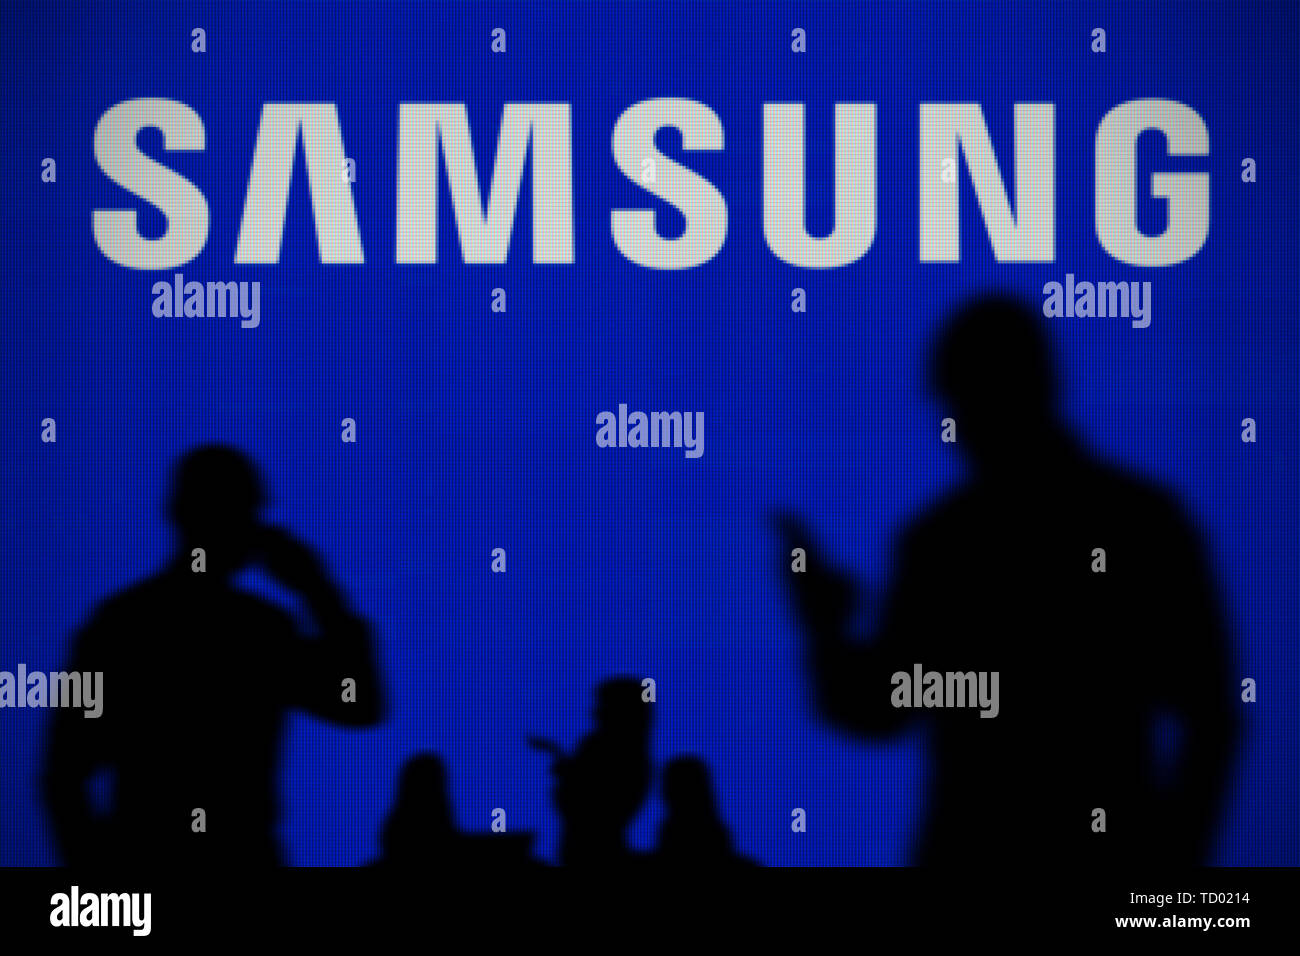 The Samsung logo is seen on an LED screen in the background while a silhouetted person uses a smartphone in the foreground (Editorial use only) Stock Photo